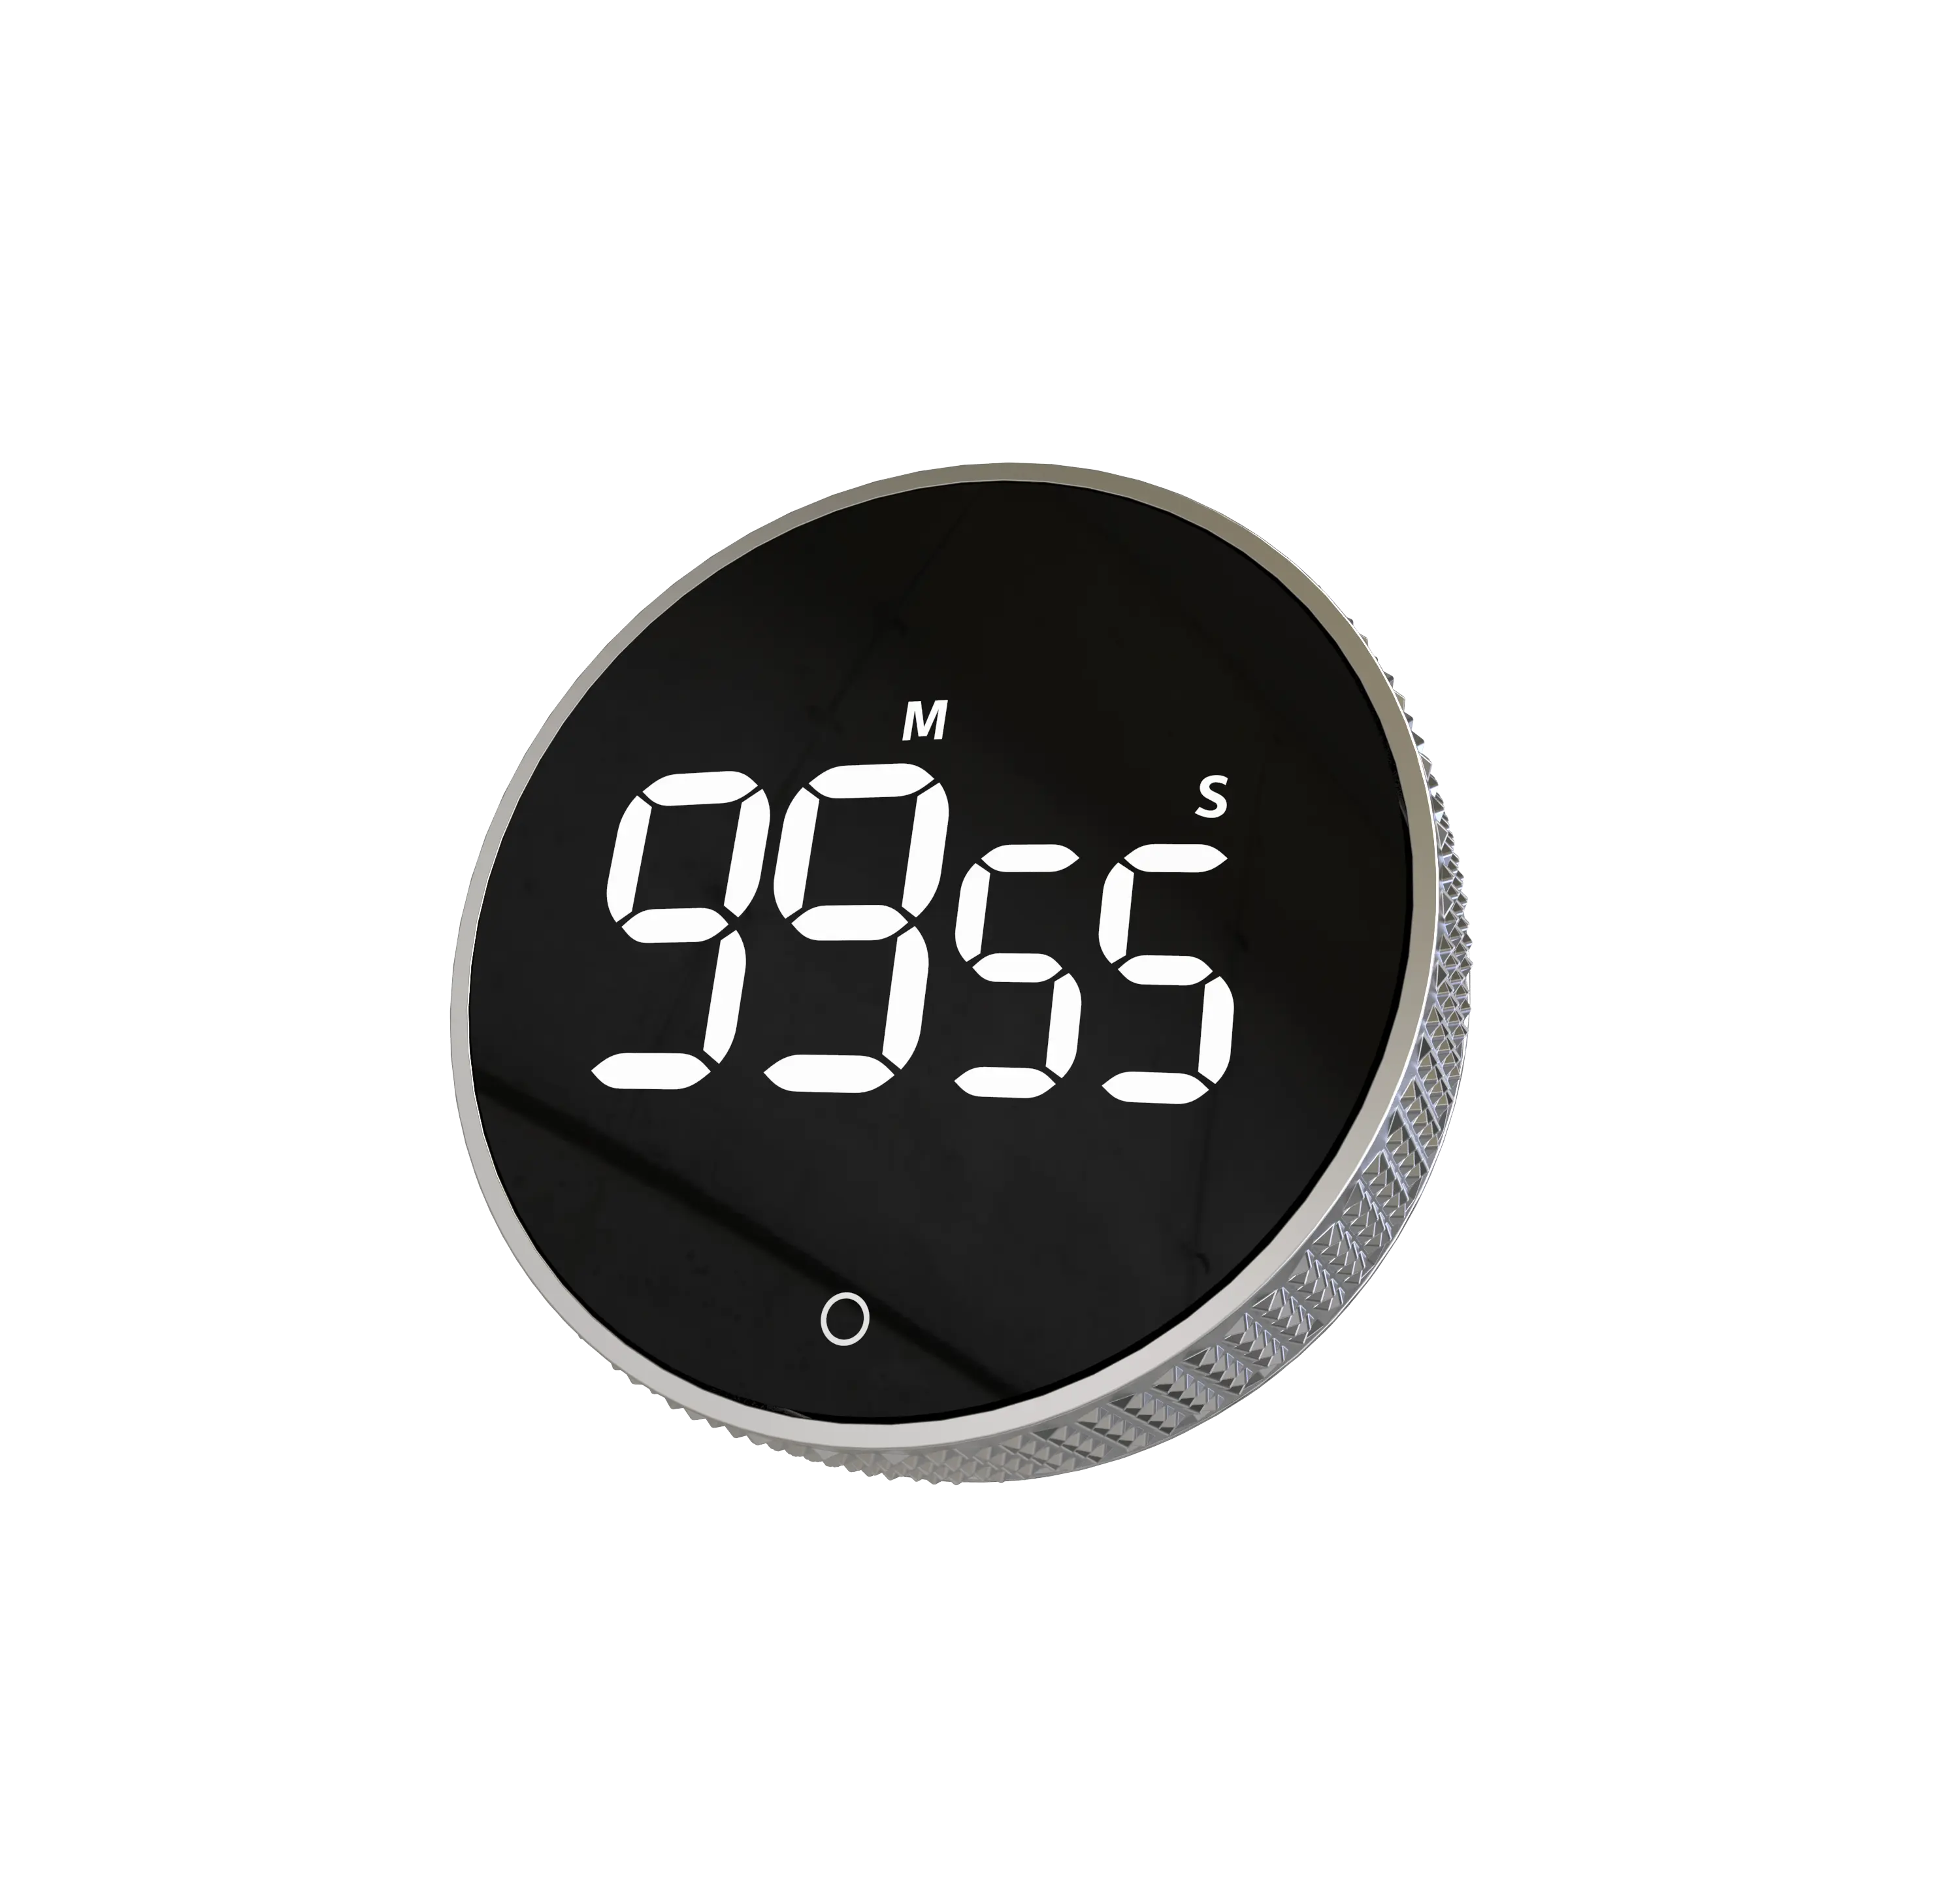 Yoton best Digital kitchen Timer With up tp 99 Min 59 Second Countdown